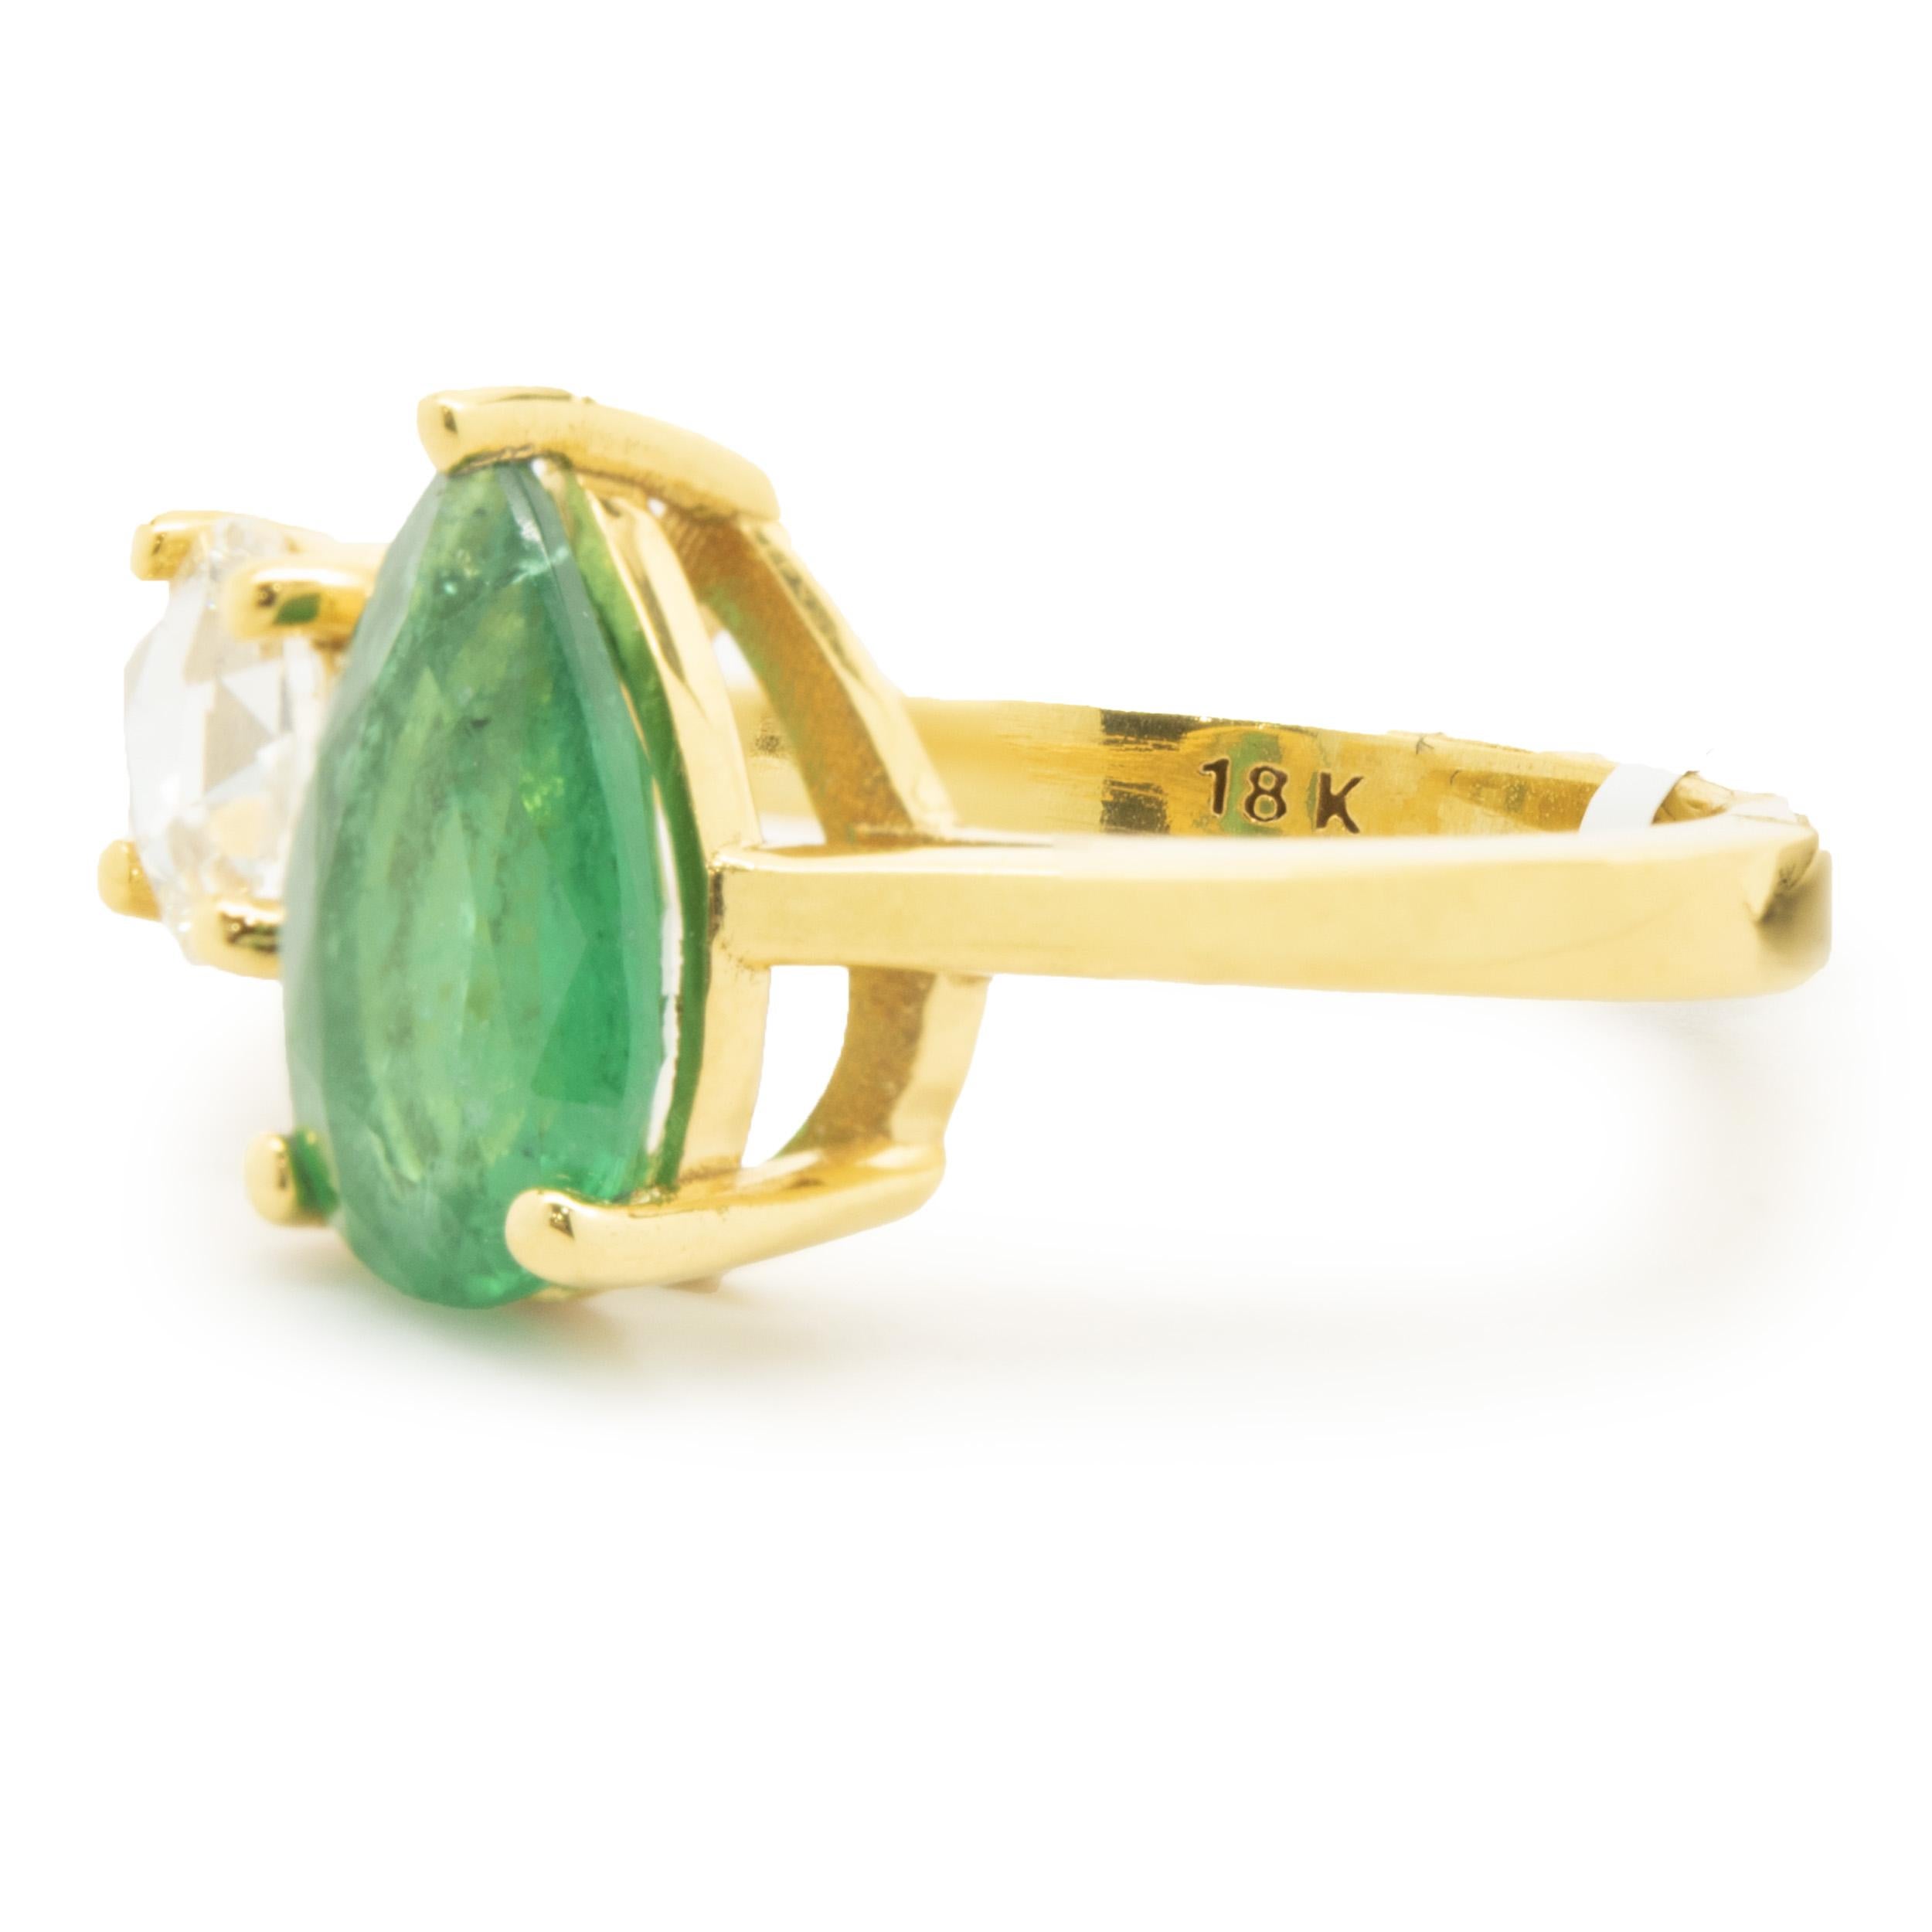 Designer: custom design
Material: 18K yellow gold
Diamond: 1 rose cut = 0.56cttw
Color: G
Clarity: SI1
Emerald: 1 pear cut = 1.93ct
Dimensions: ring top measures 11.76mm wide
Ring Size: 6 (please allow two extra shipping days for sizing requests)